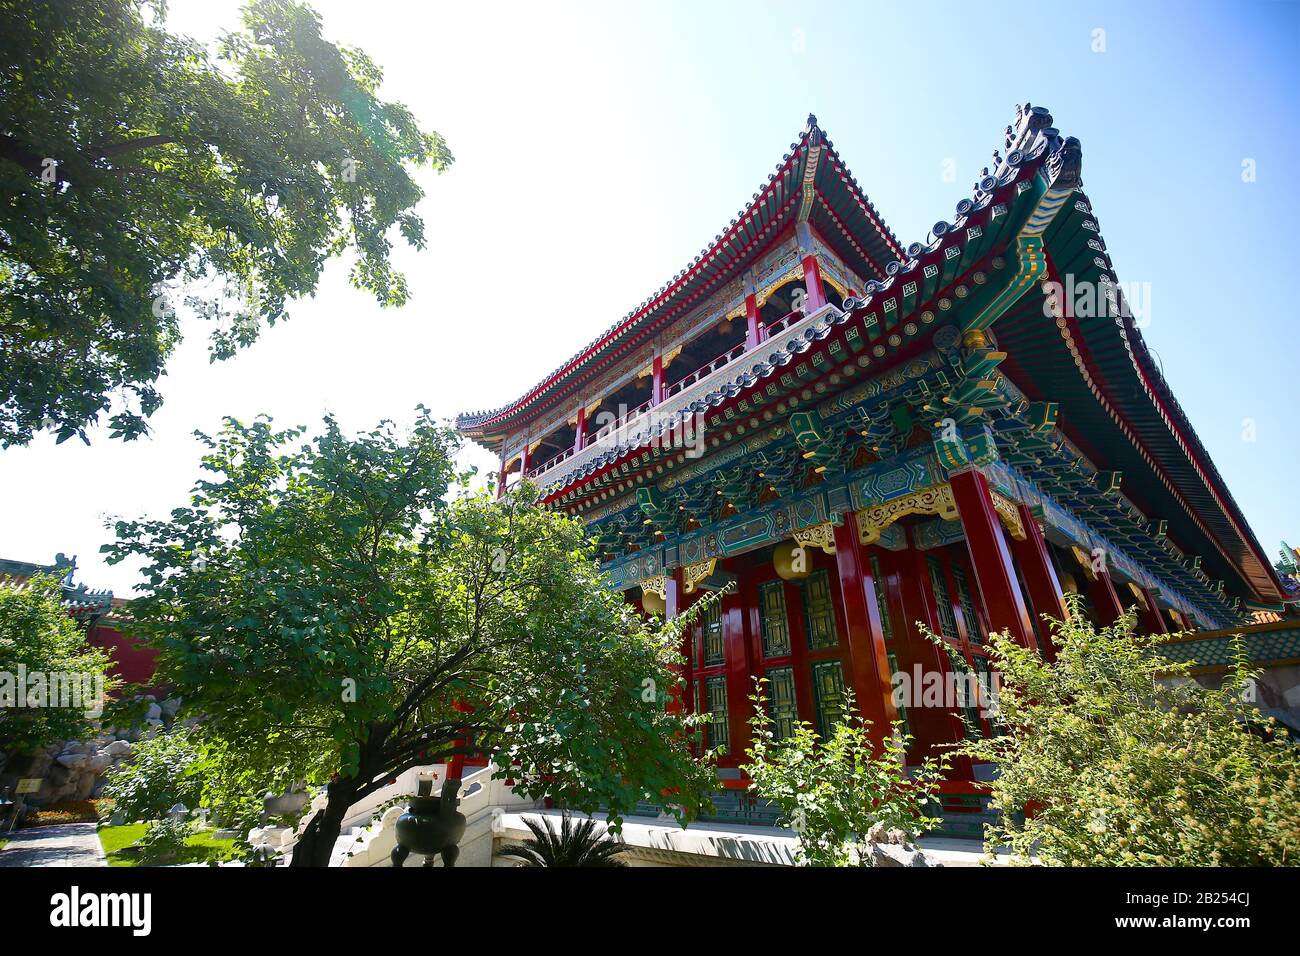 Traditional figures and shape on painted Chinese roof. Chinese ancient architecture. Beijing Stock Photo